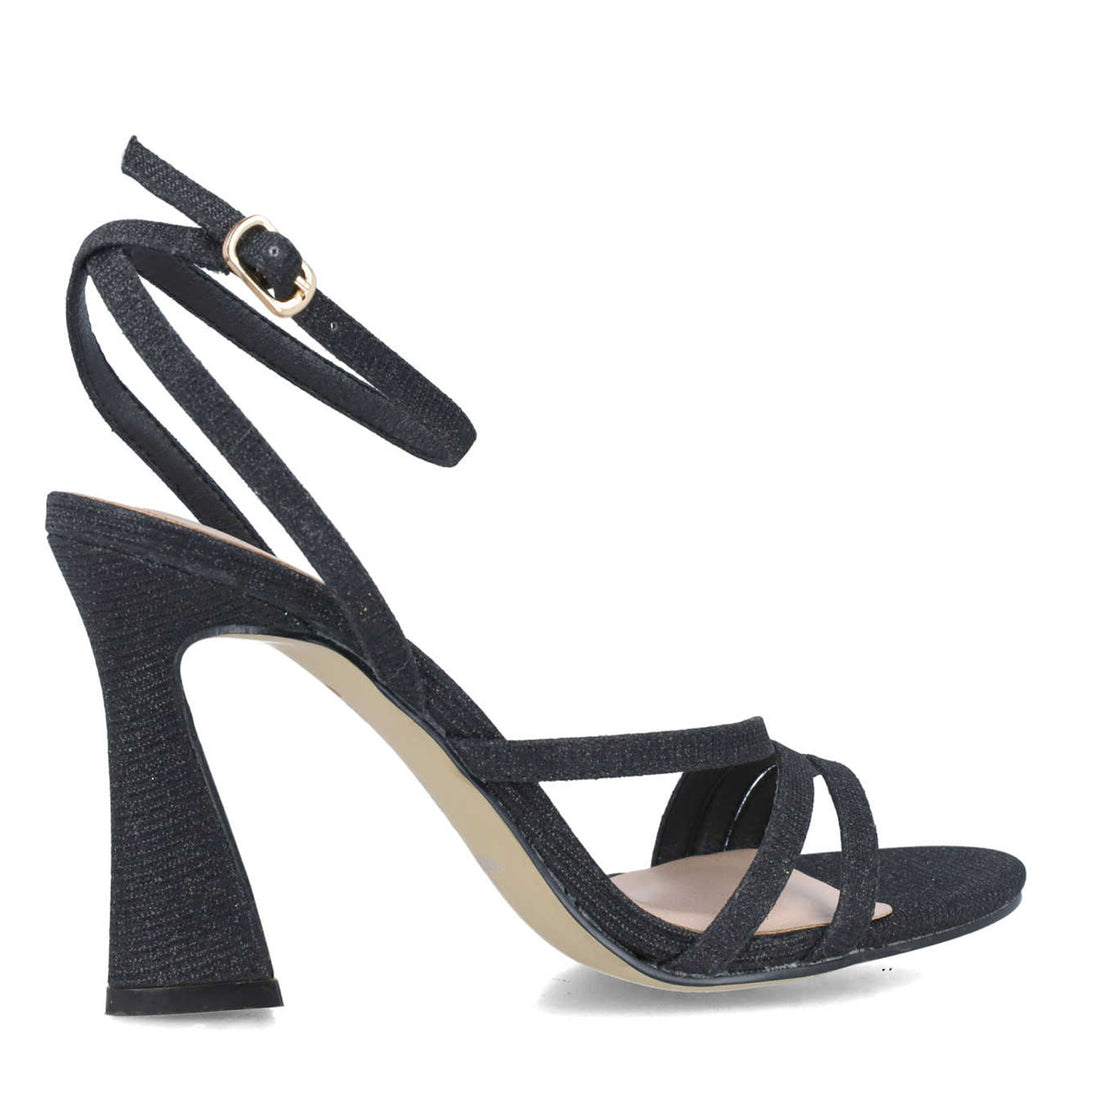 Black High-Heel Sandals With Ankle-Strap